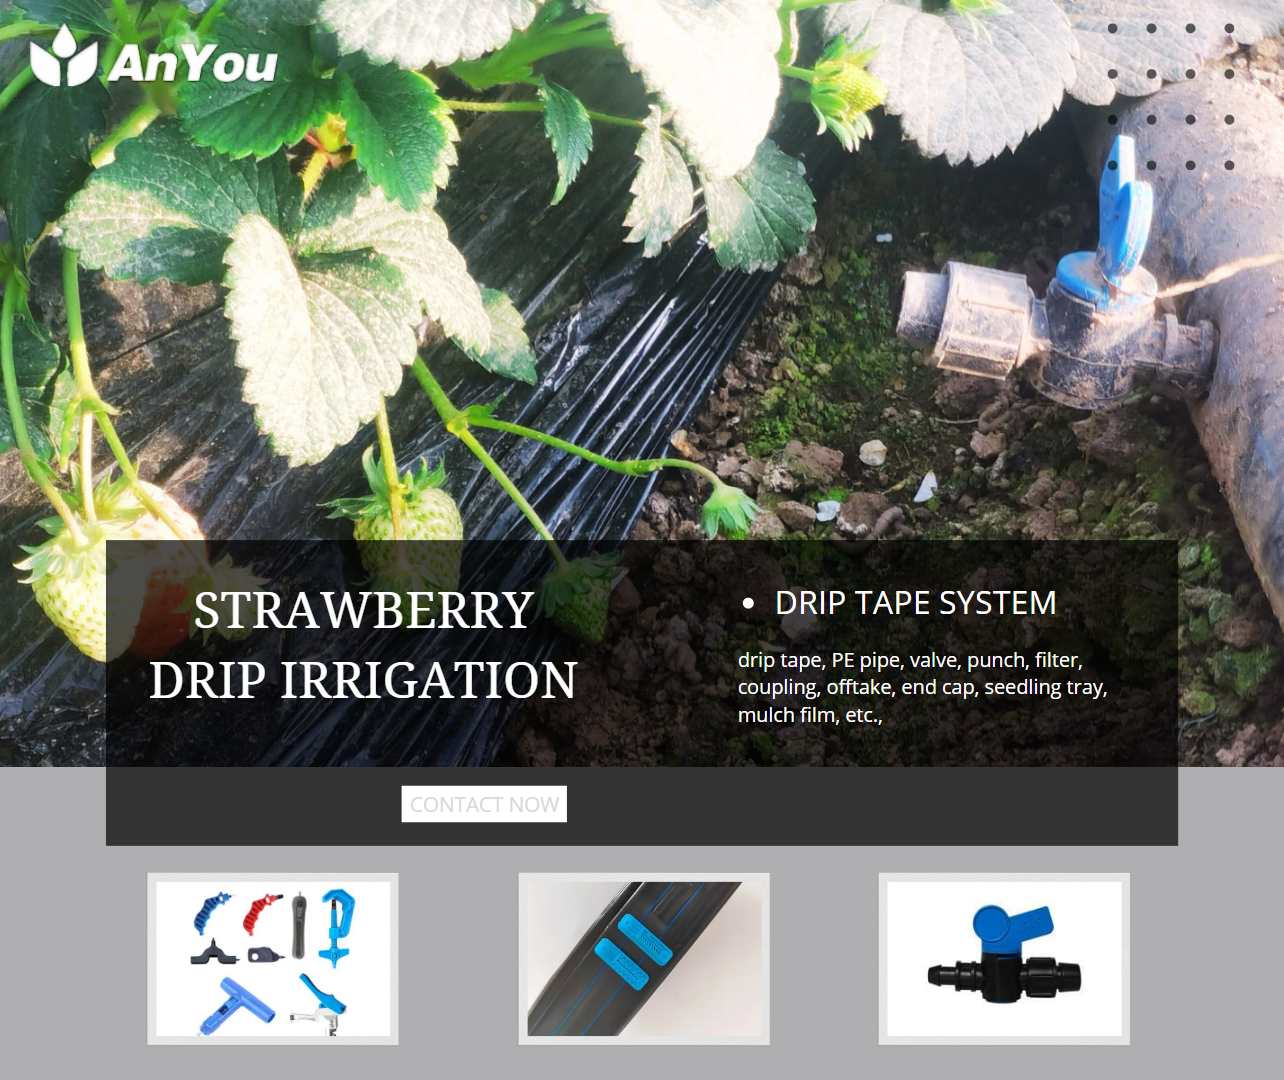 The benefits of using drip tape for strawberry cultivation